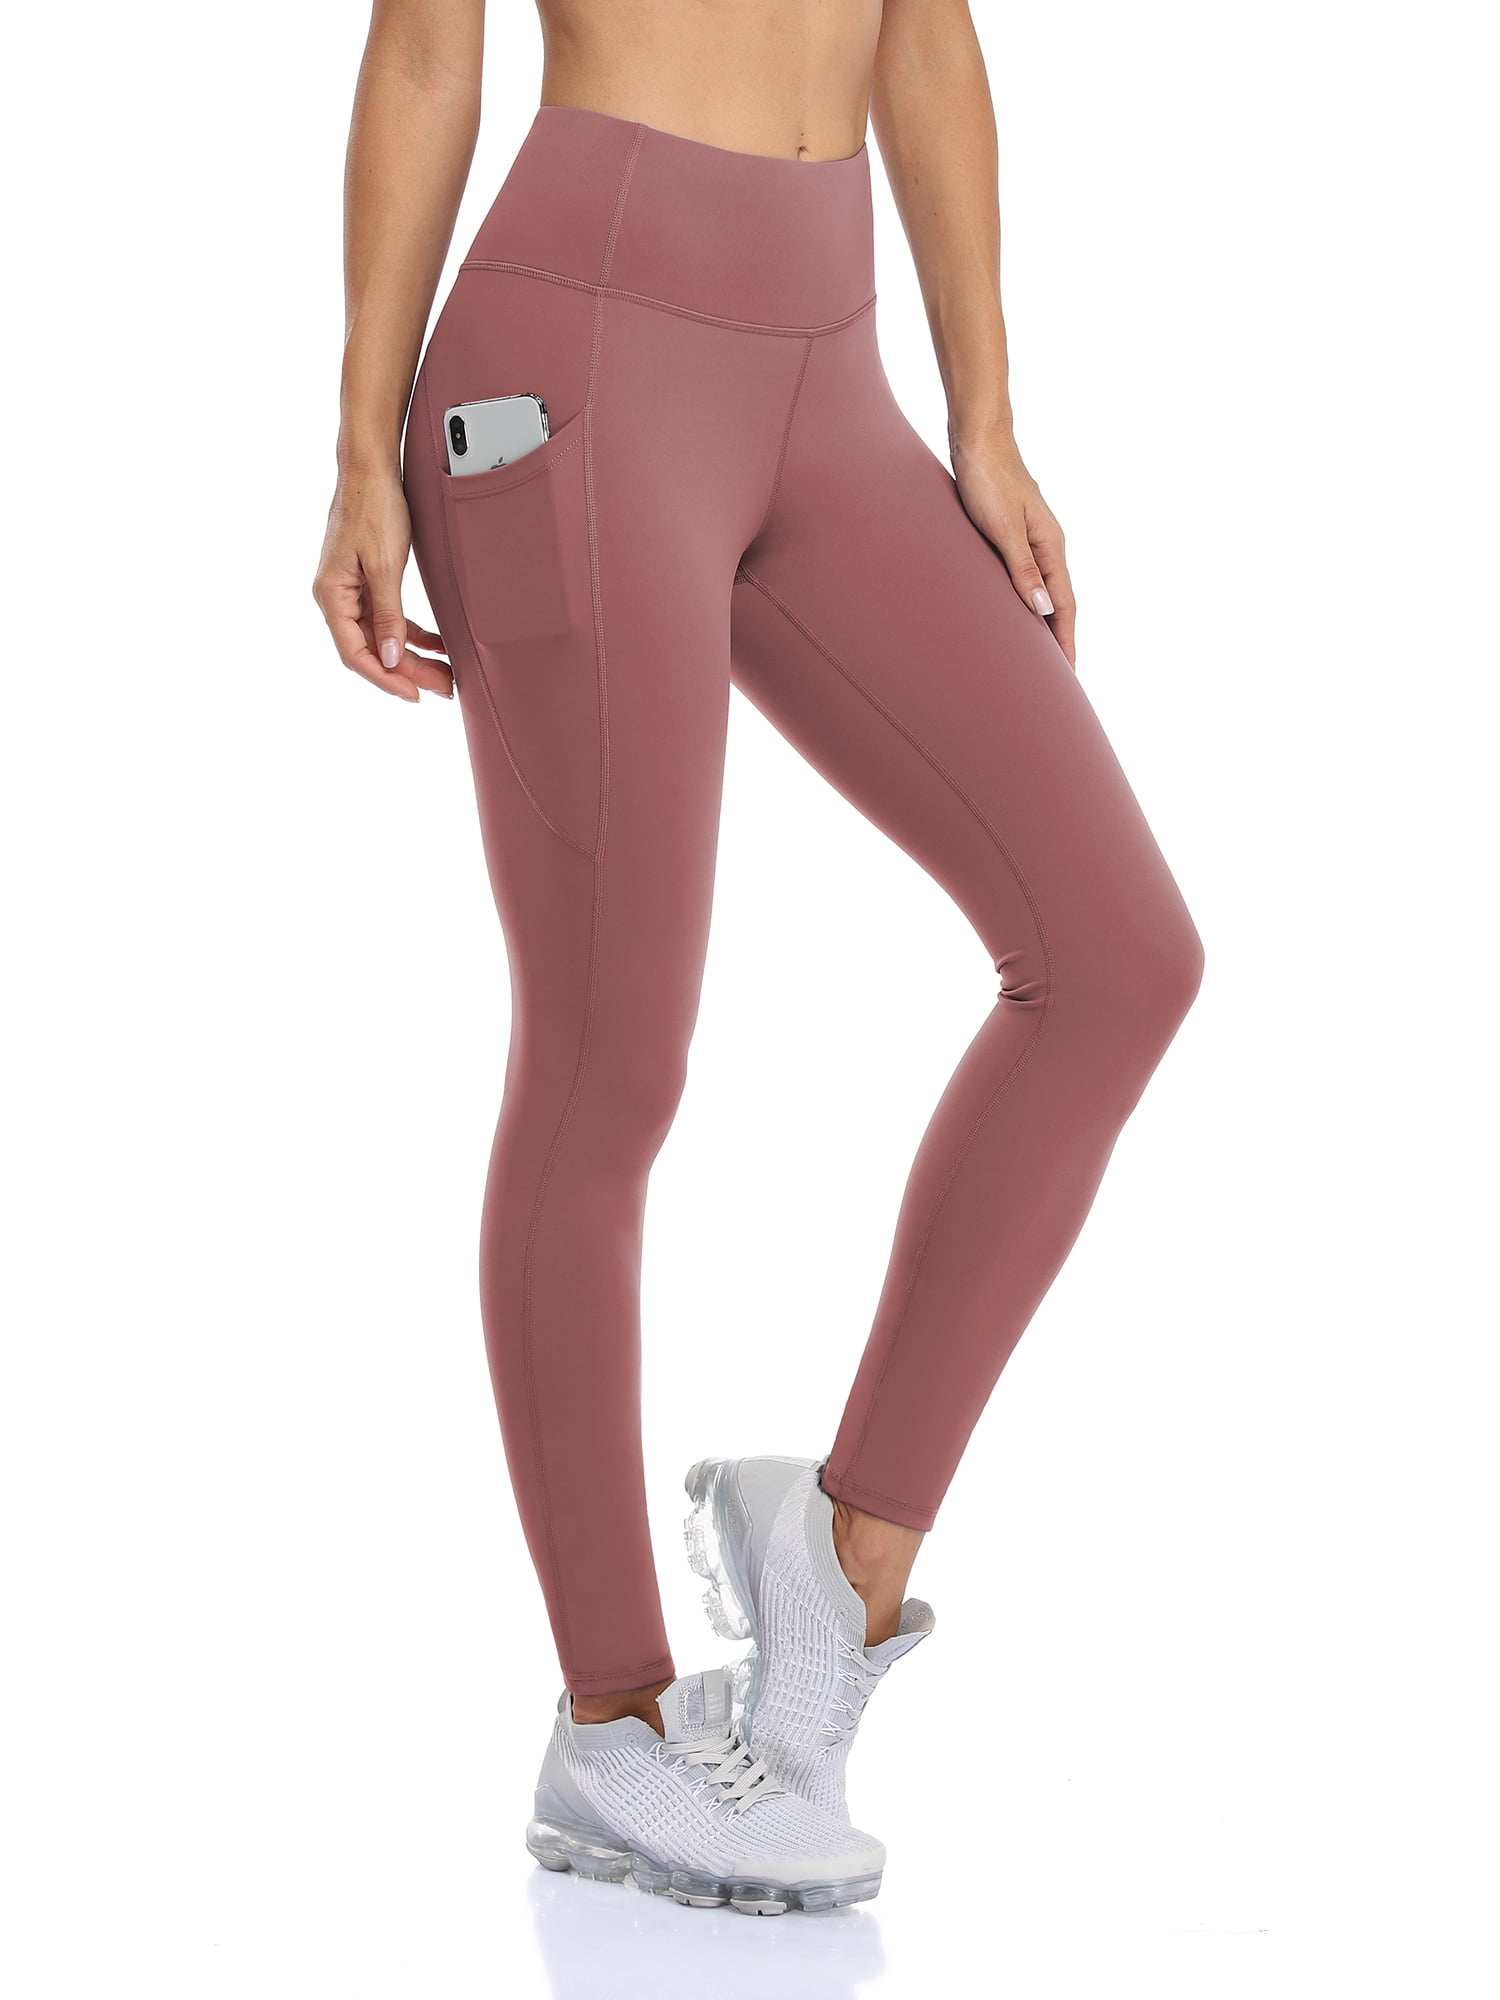 Women's High Rise Tight Yoga Pants Buttery Soft Legging With Hidden Pocket